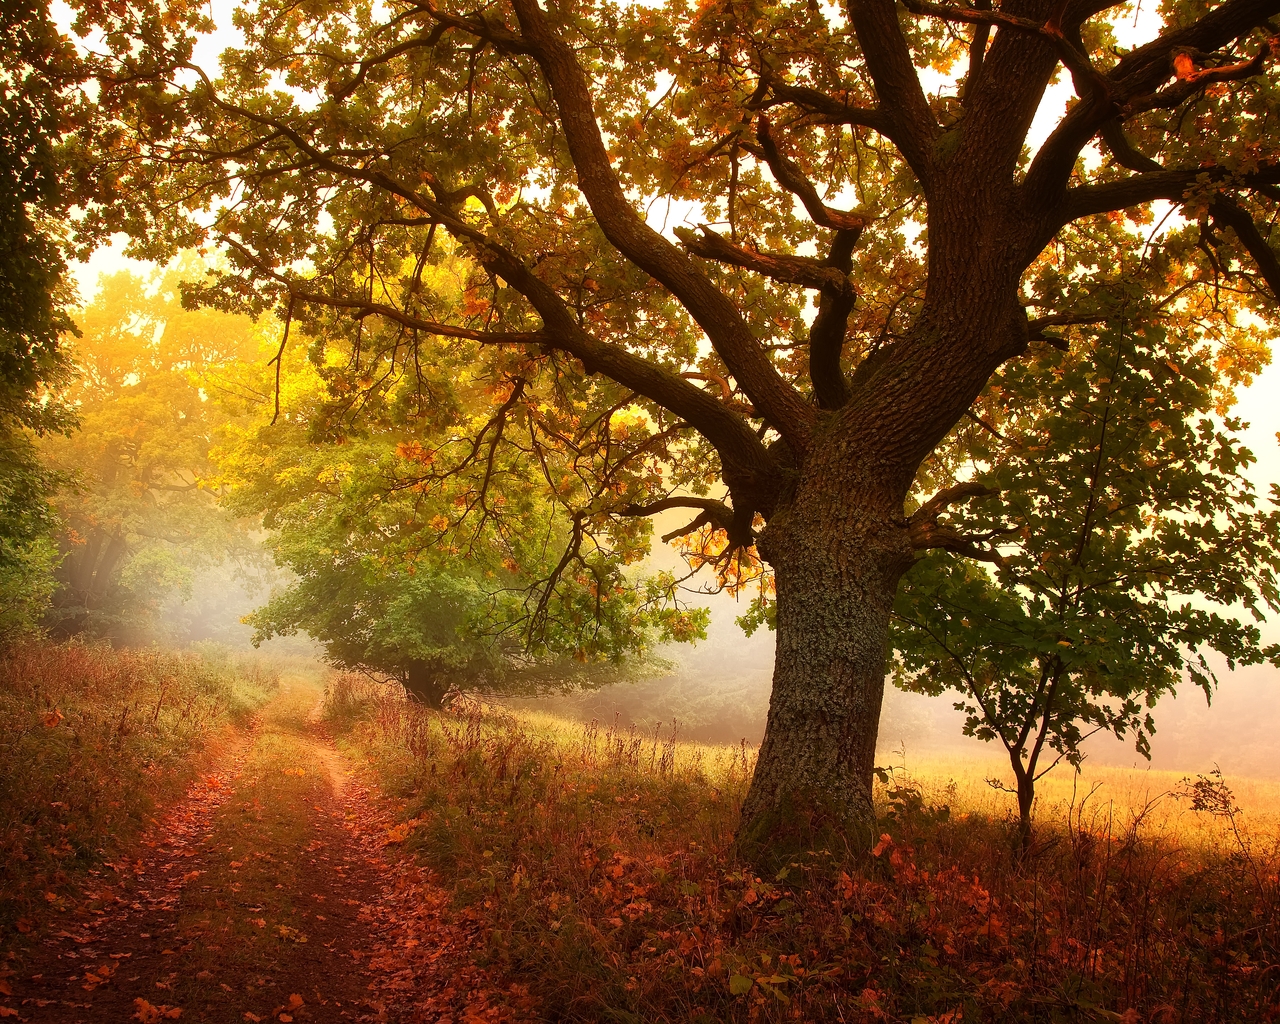 Image: Autumn, forest, tree, branches, leaves, grass, footpath, day, light